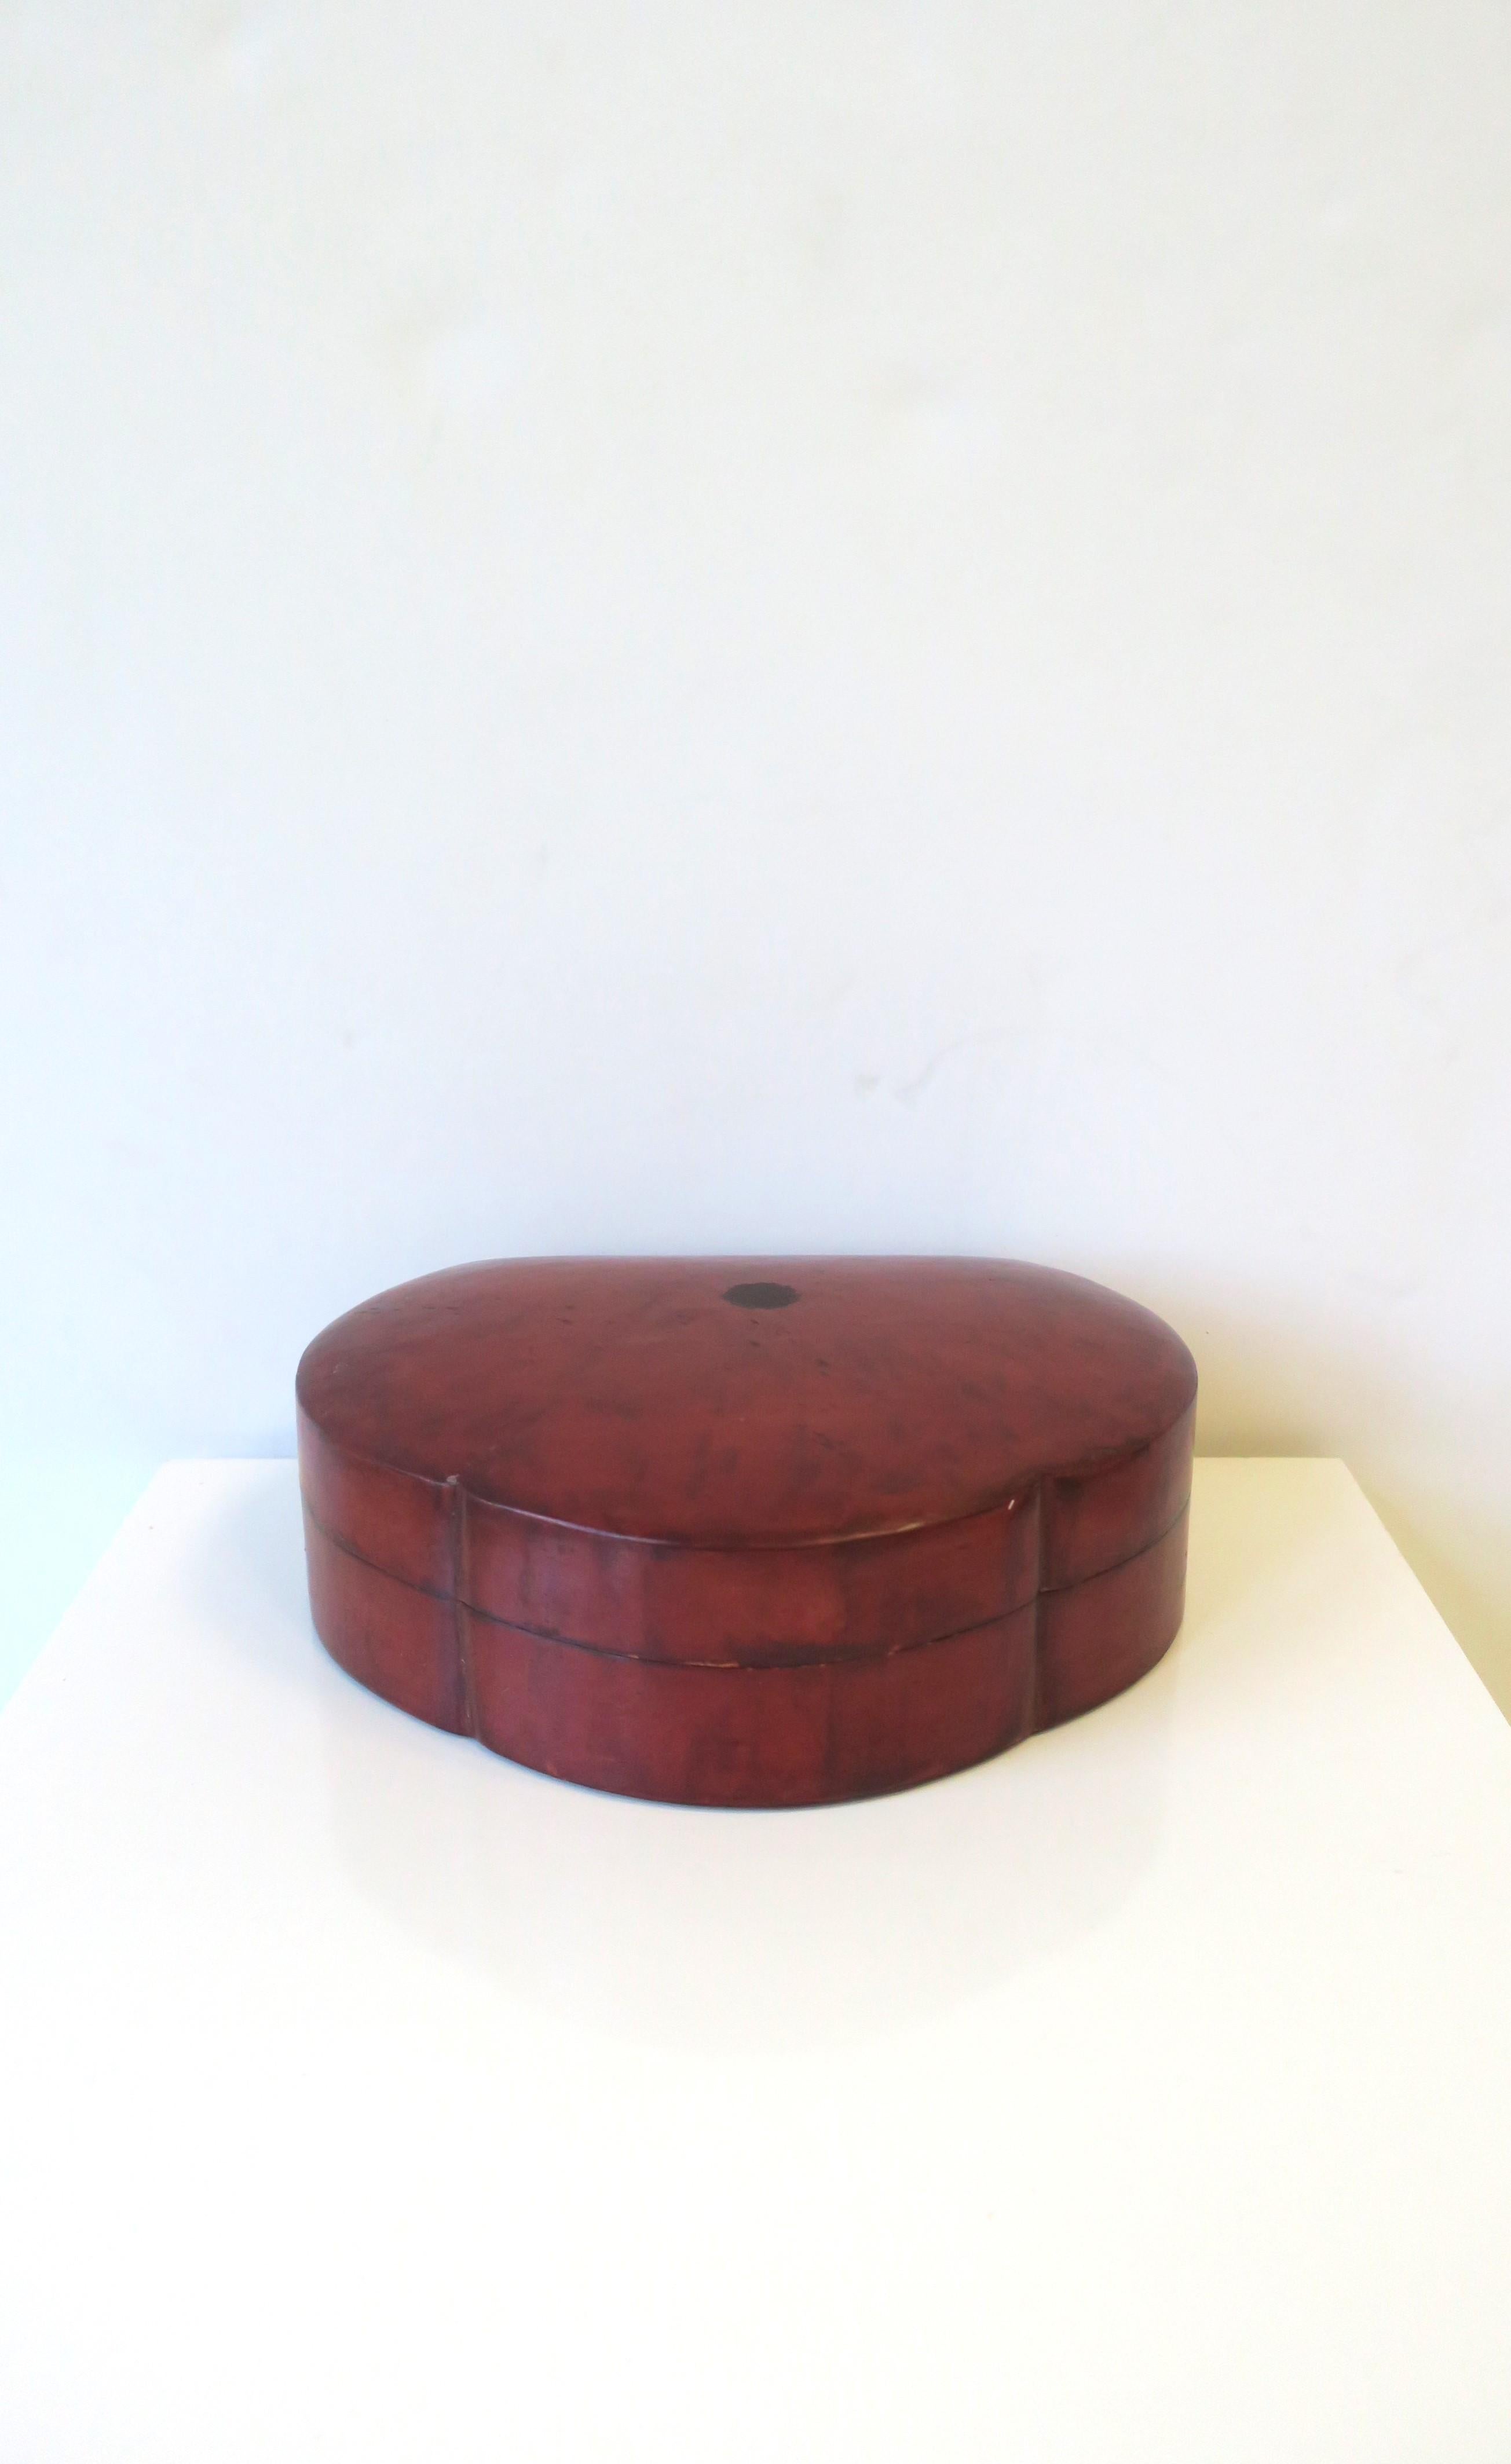 Italian Leather Jewelry Box with Scalloped Design For Sale 2